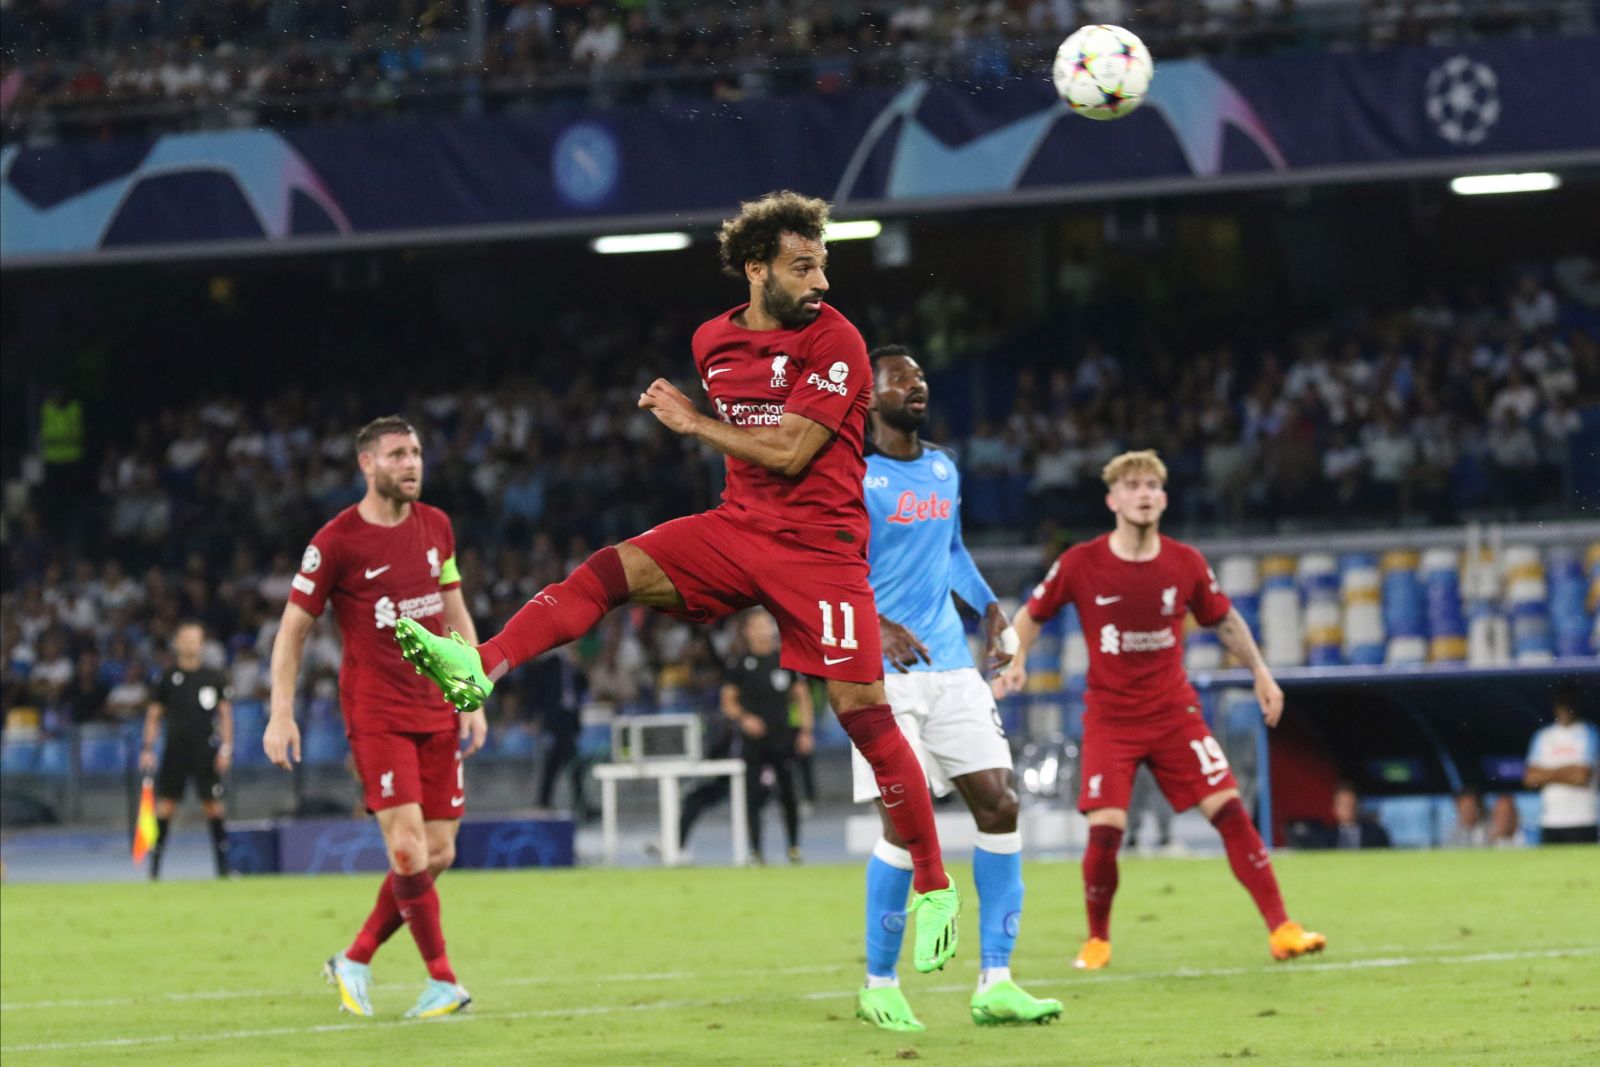 epa10168413 Liverpool’s forward Mohamed Salah (C) in action during the UEFA Champions League group A soccer match between SSC Napoli and Liverpool FC at the Diego Armando Maradona stadium in Naples, Italy, 07 September 2022.  EPA/CESARE ABBATE